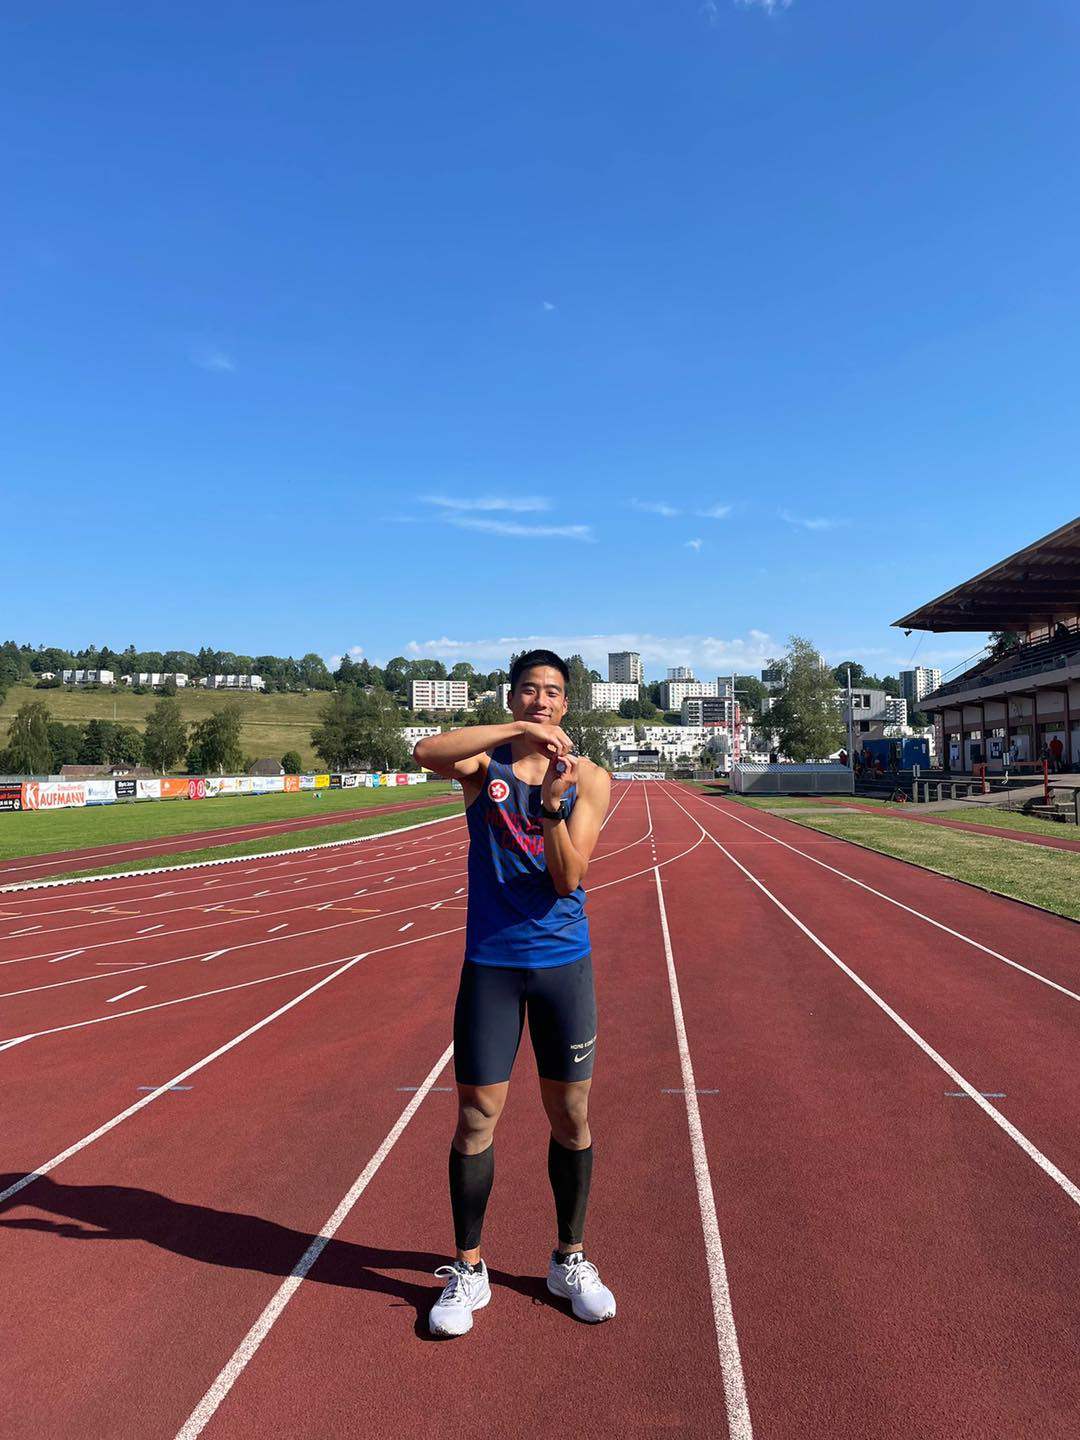 Hong Kong long jump record holder Chan Ming-tai posted the number “8” to celebrate his breakthrough after the race in Switzerland. Photo: HKAAA Fb